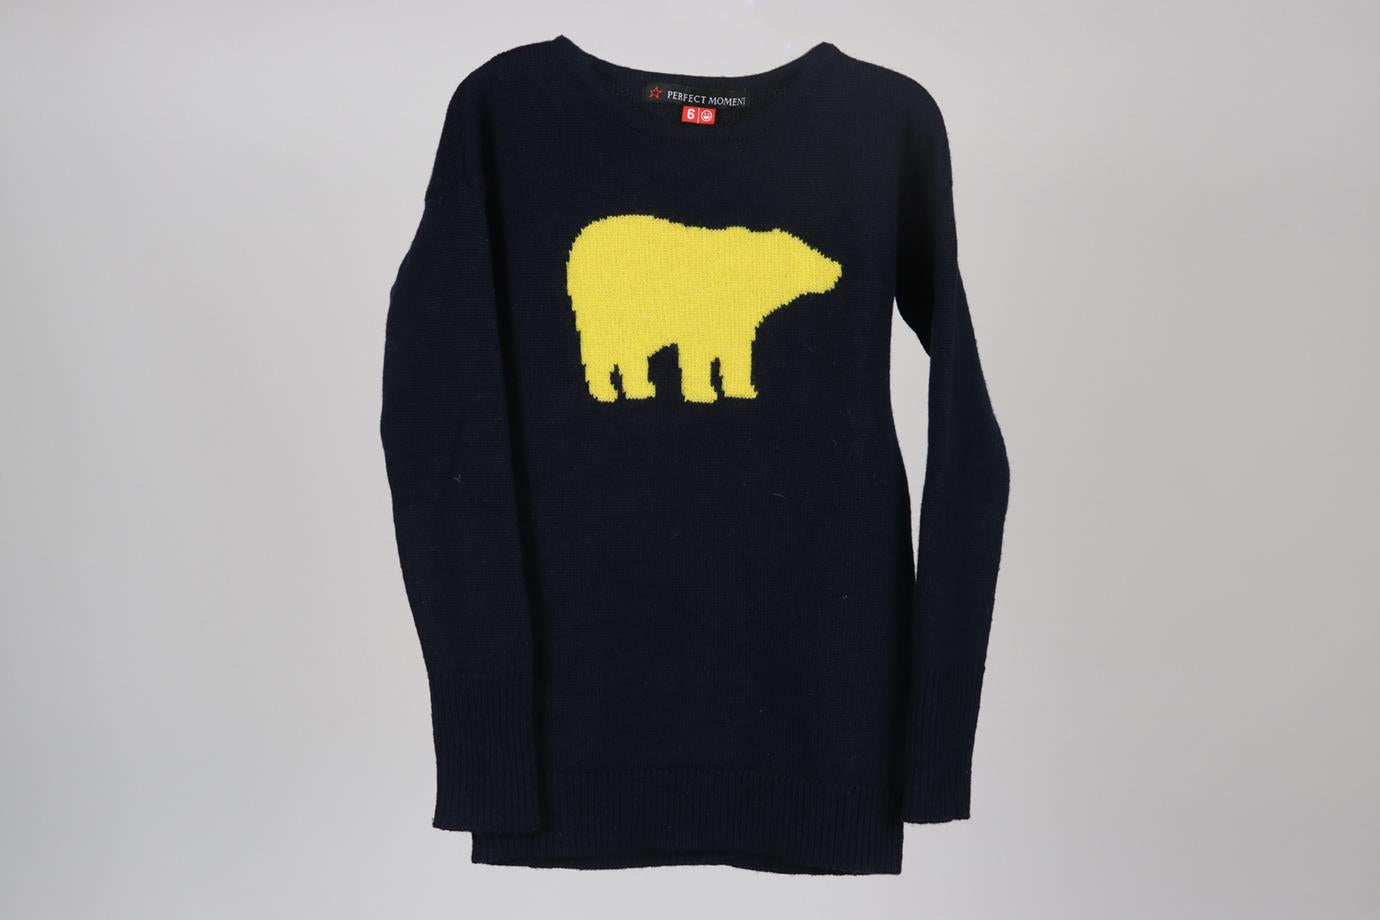 PERFECT MOMENT KIDS BOYS WOOL SWEATER 6 YEARS